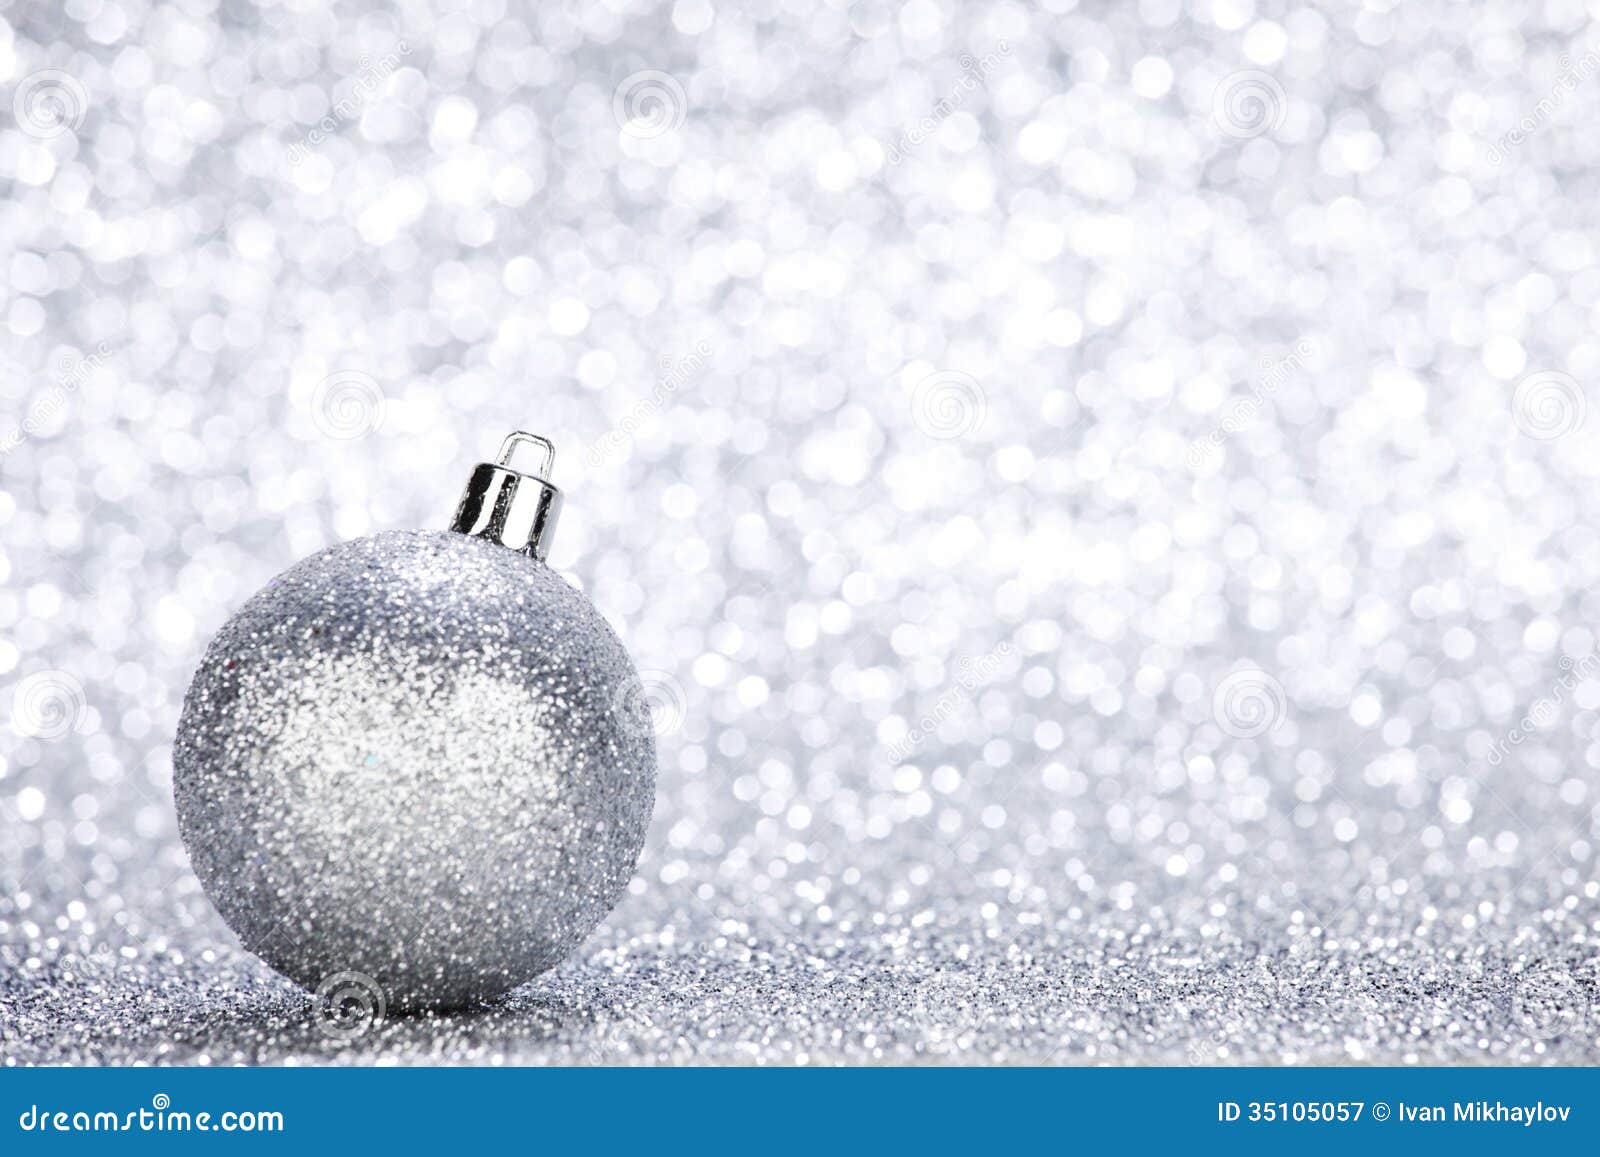 Silver christmas ball stock image. Image of background - 35105057